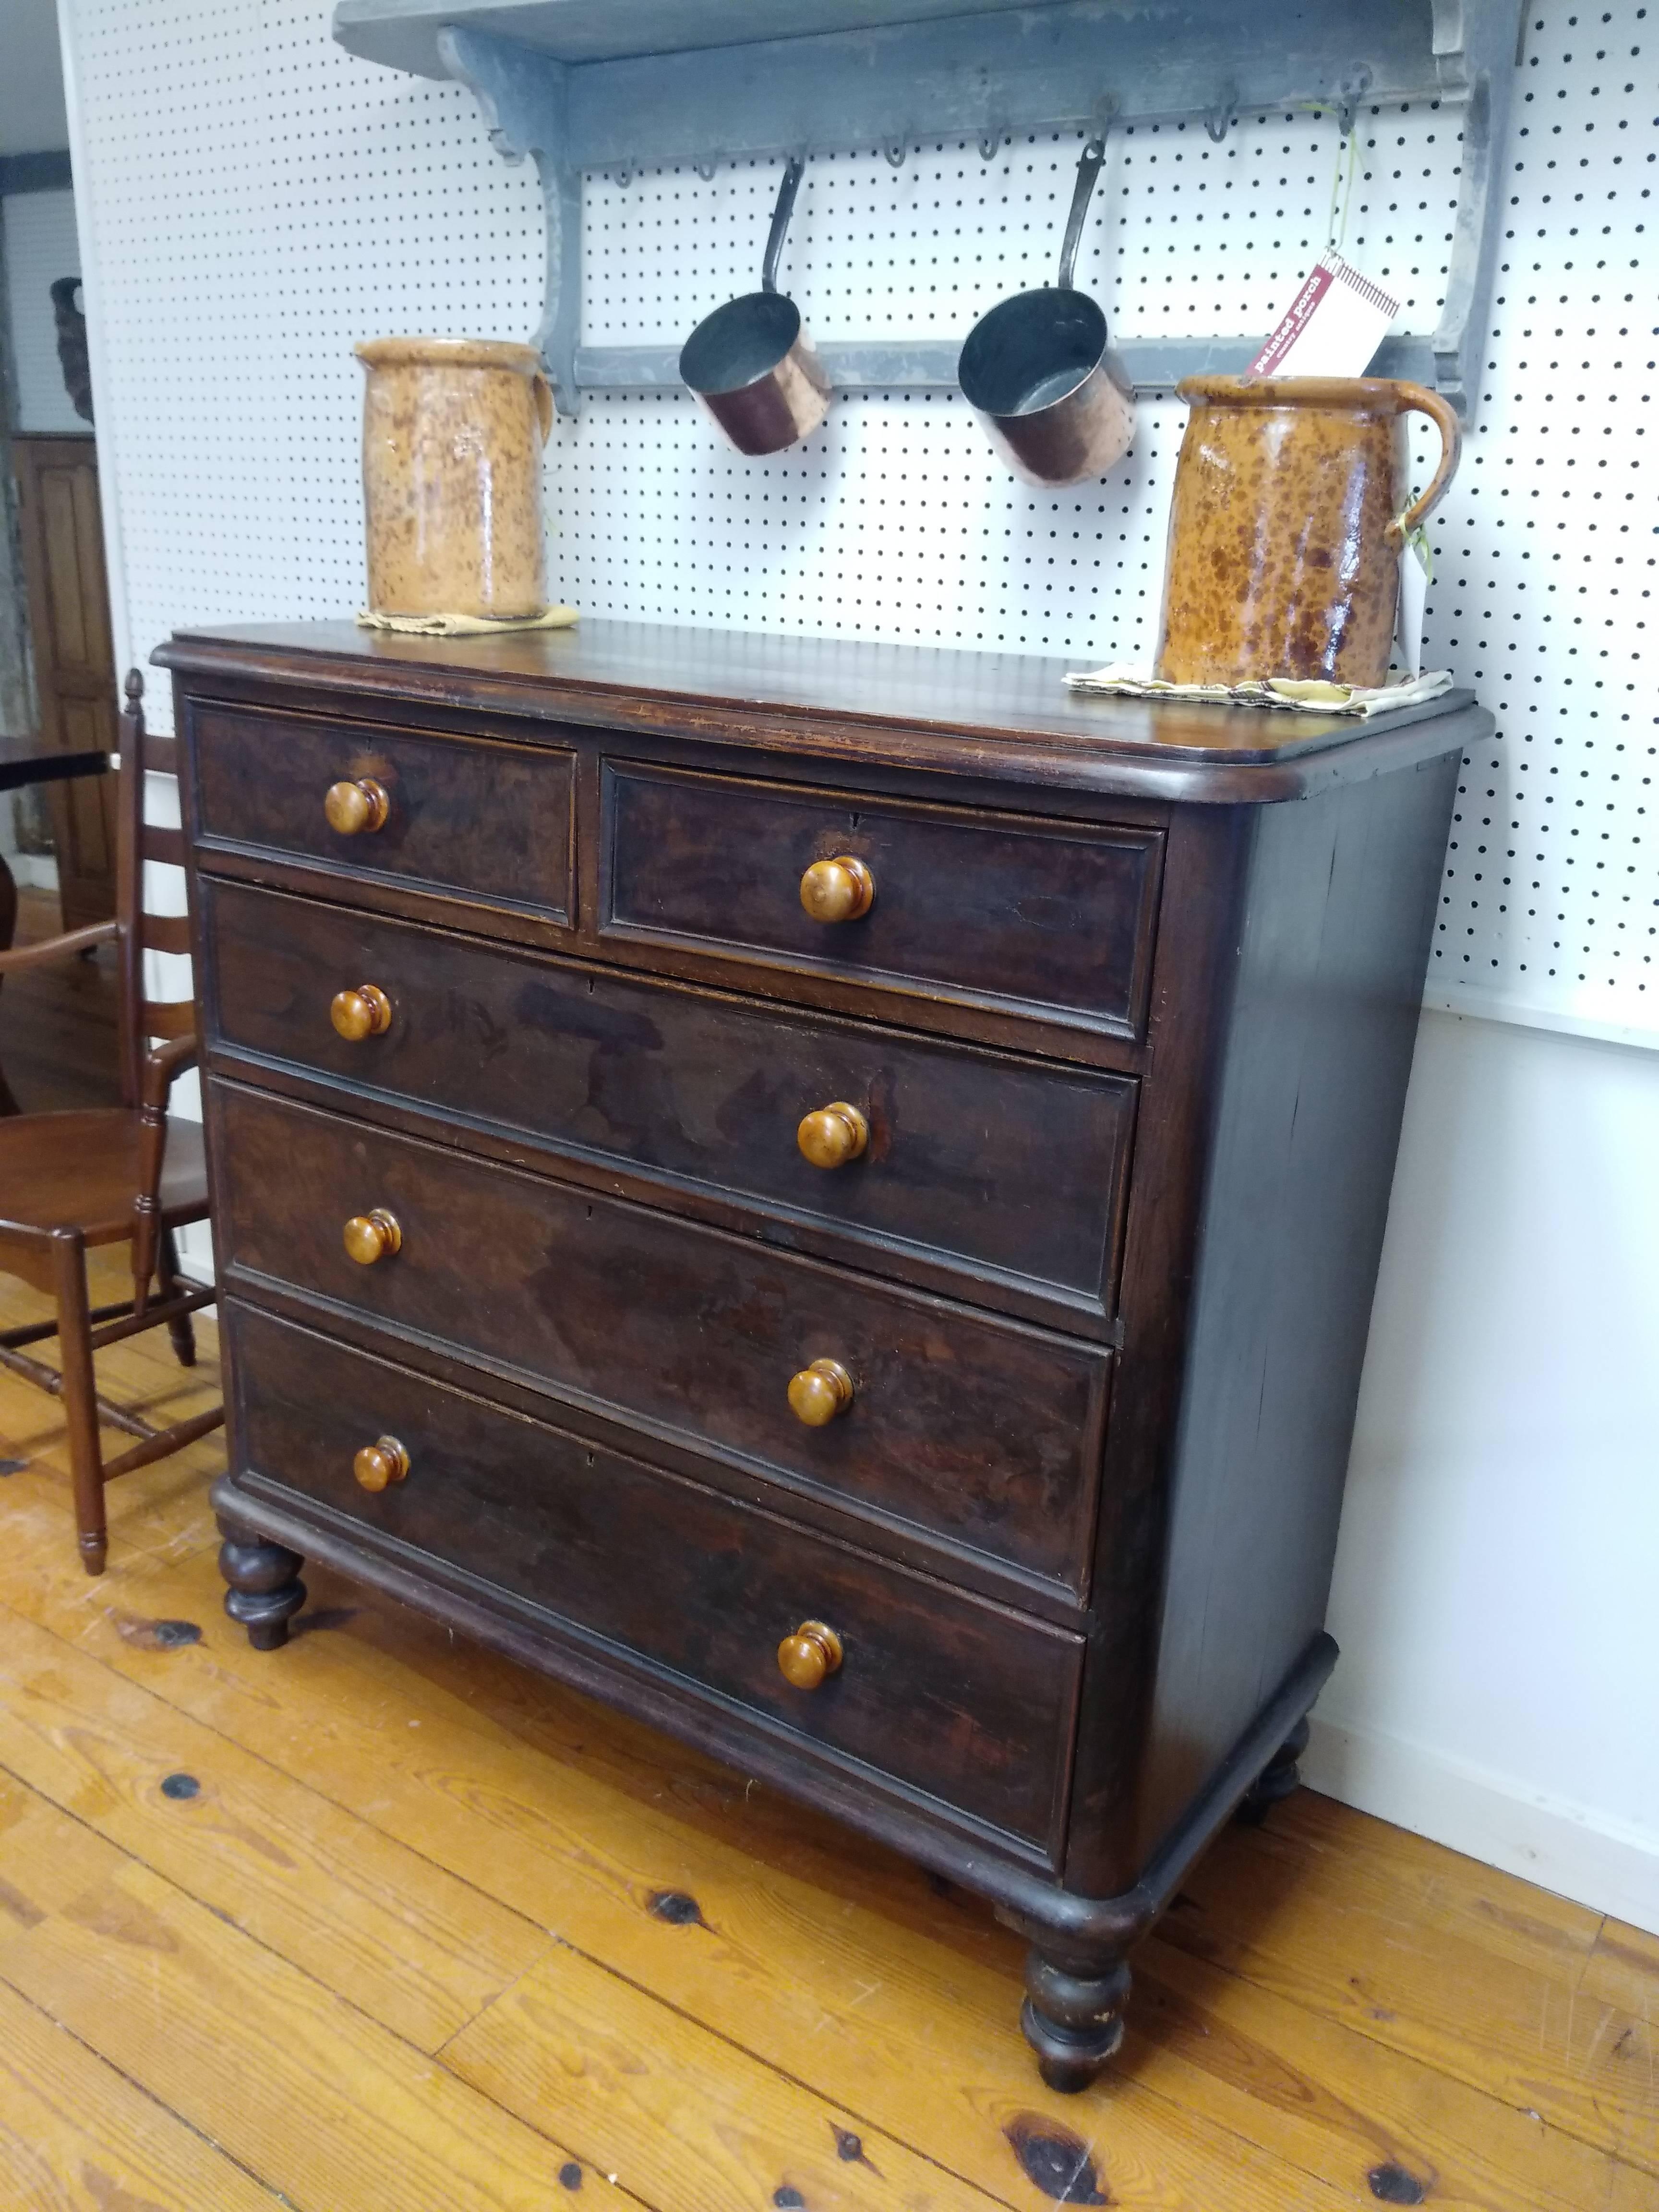 This is a very pretty painted wooden French chest of drawers with contrasting coffee-hued knobs. This piece dates from 1870 and is in very nice condition. It's rich looking and would be a most useful piece in any bedroom in your home. The top has a